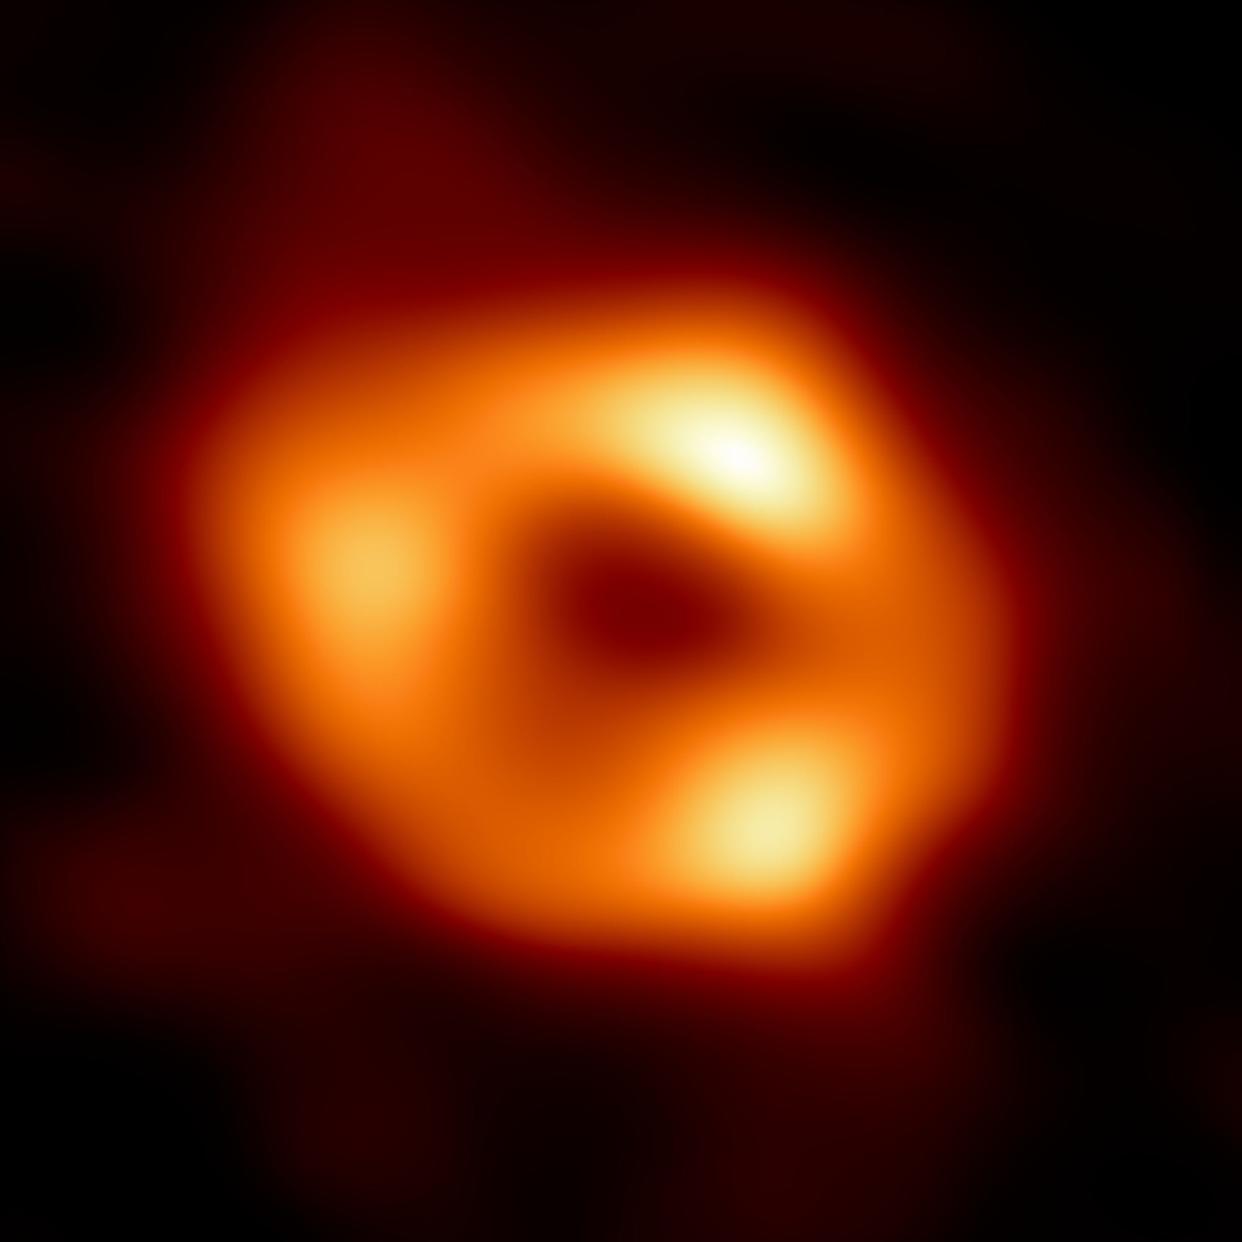 blurry red circle around a black center which represents the first photo of the supermassive black hole in our galaxy's center